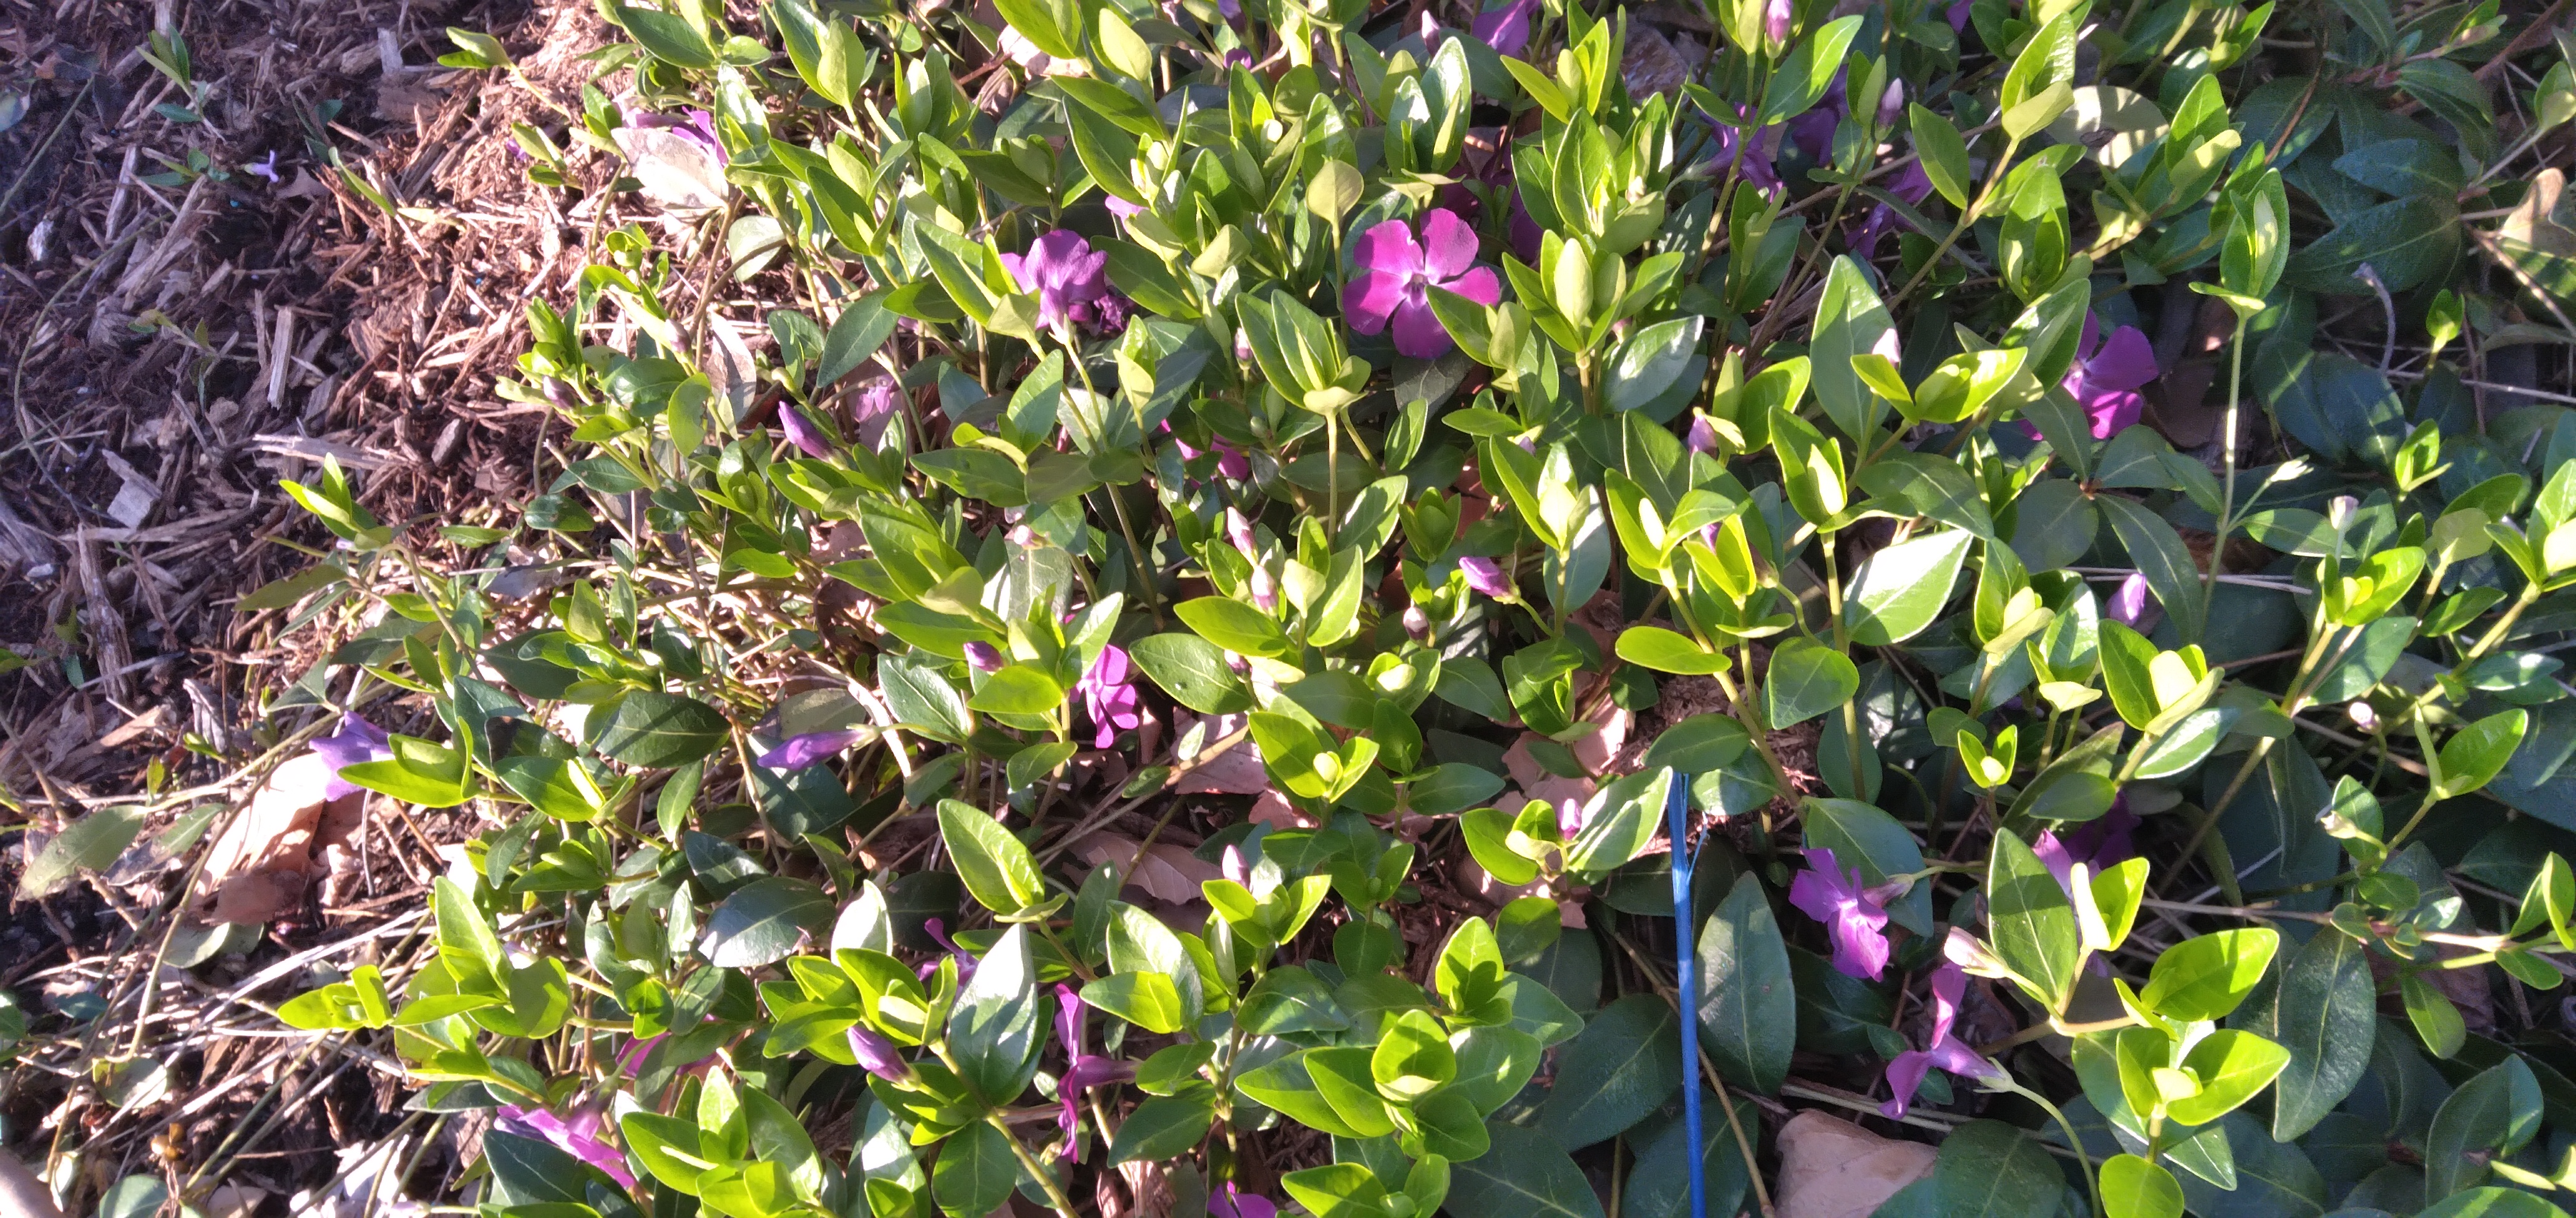 A small purple flower in a thick mat of green leaves